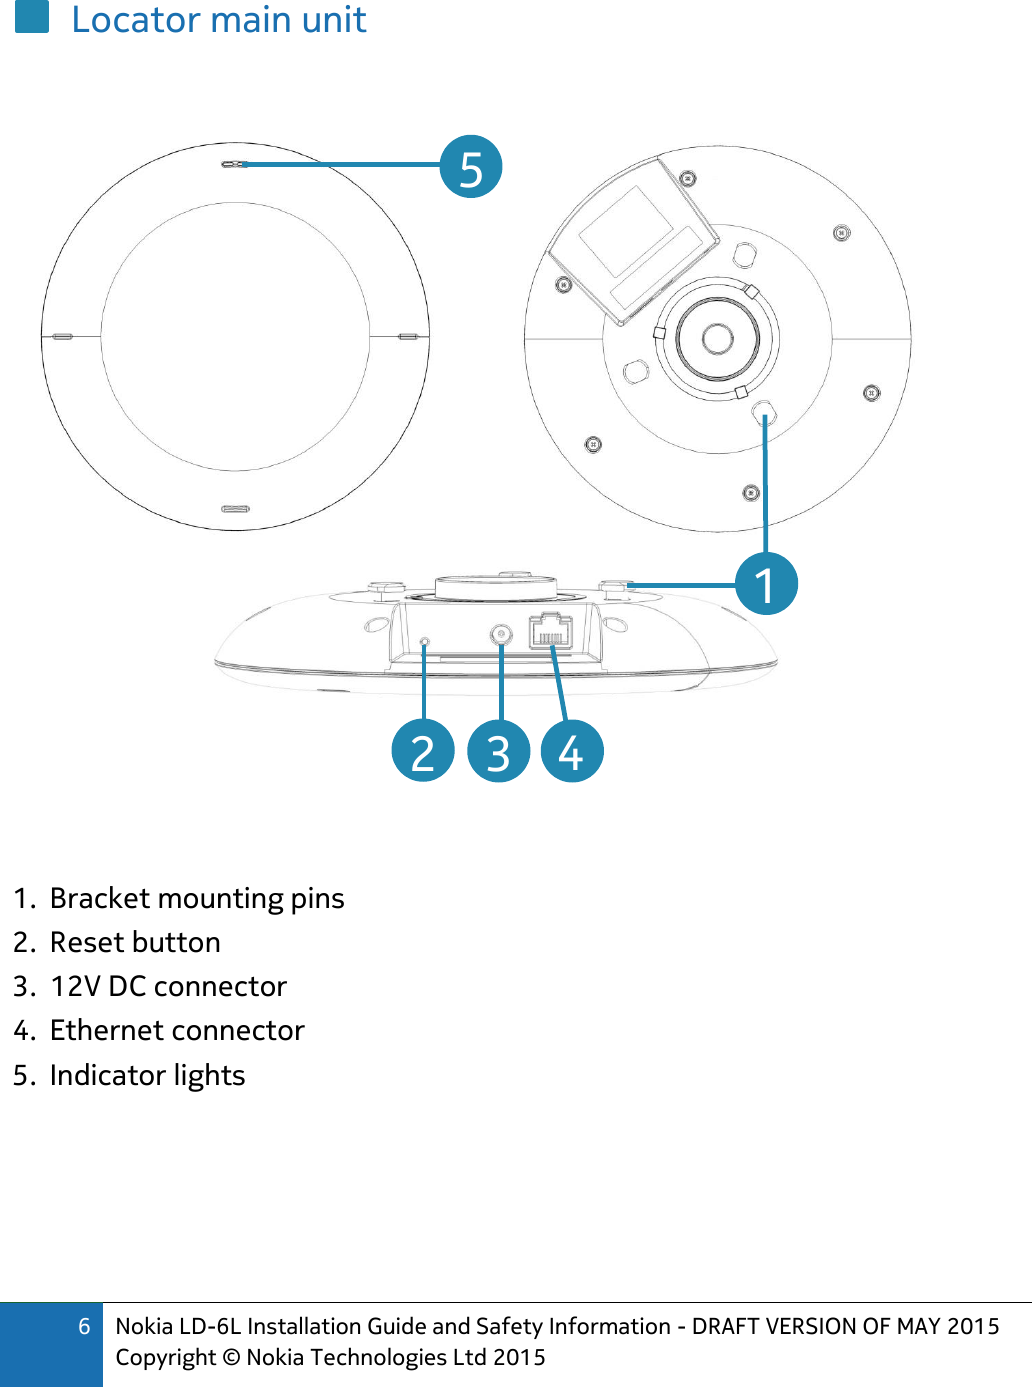 6 Nokia LD-6L Installation Guide and Safety Information - DRAFT VERSION OF MAY 2015 Copyright © Nokia Technologies Ltd 2015  Locator main unit       1. Bracket mounting pins 2. Reset button 3. 12V DC connector 4. Ethernet connector 5. Indicator lights      2  3  4  5  1 